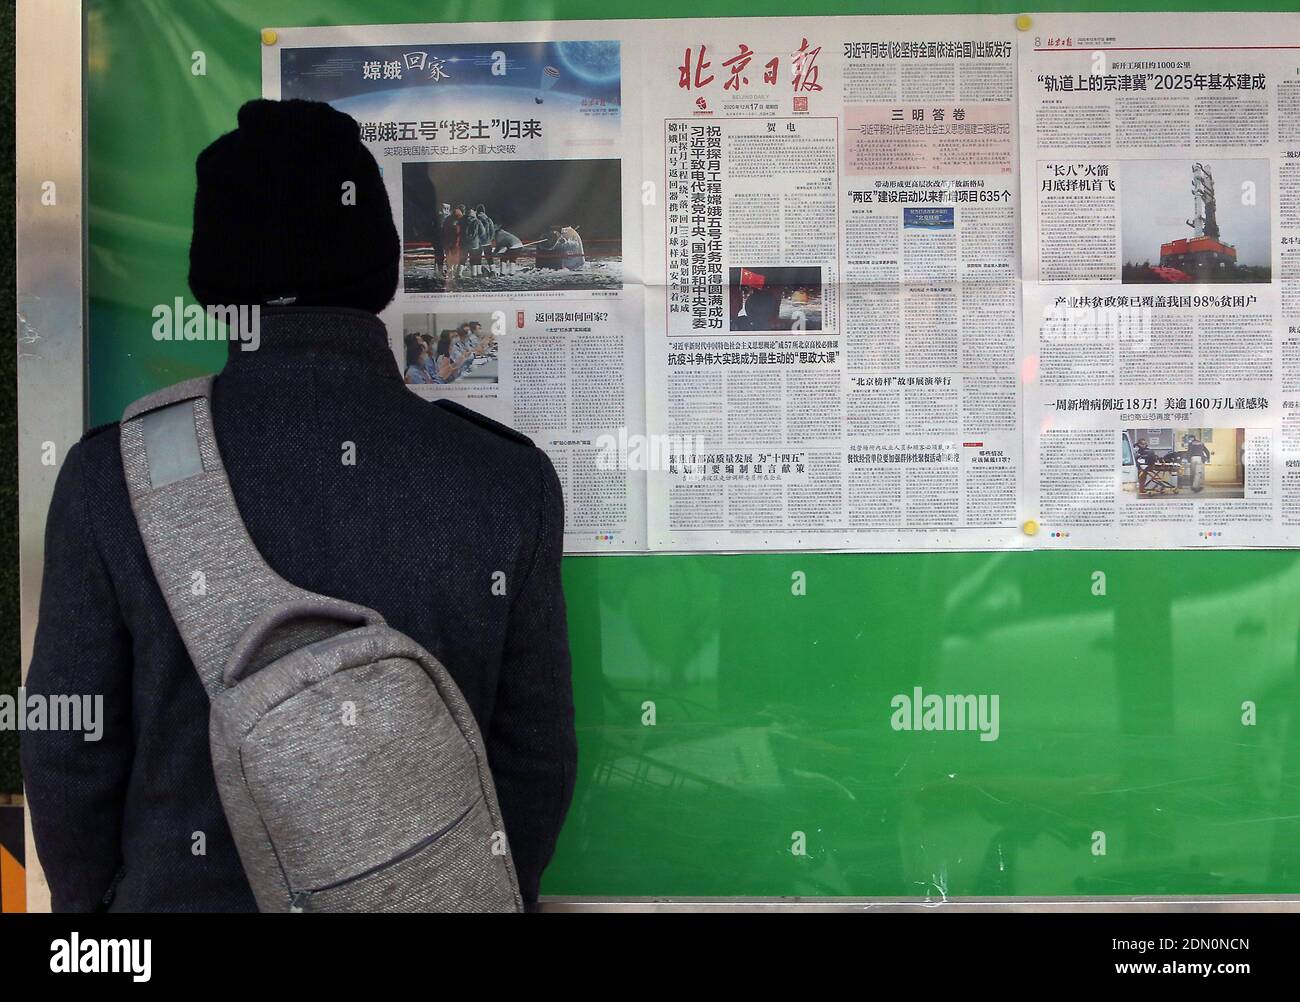 Beijing, China. 17th Dec, 2020. Chinese read public newspaper boards, many featuring the landing of the Chang'e-5 lunar probe, in Beijing on Thursday, December 17, 2020. China celebrated the safe landing of if its first lunar probe returning with samples from the moon's surface. Photo by Stephen Shaver/UPI Credit: UPI/Alamy Live News Stock Photo